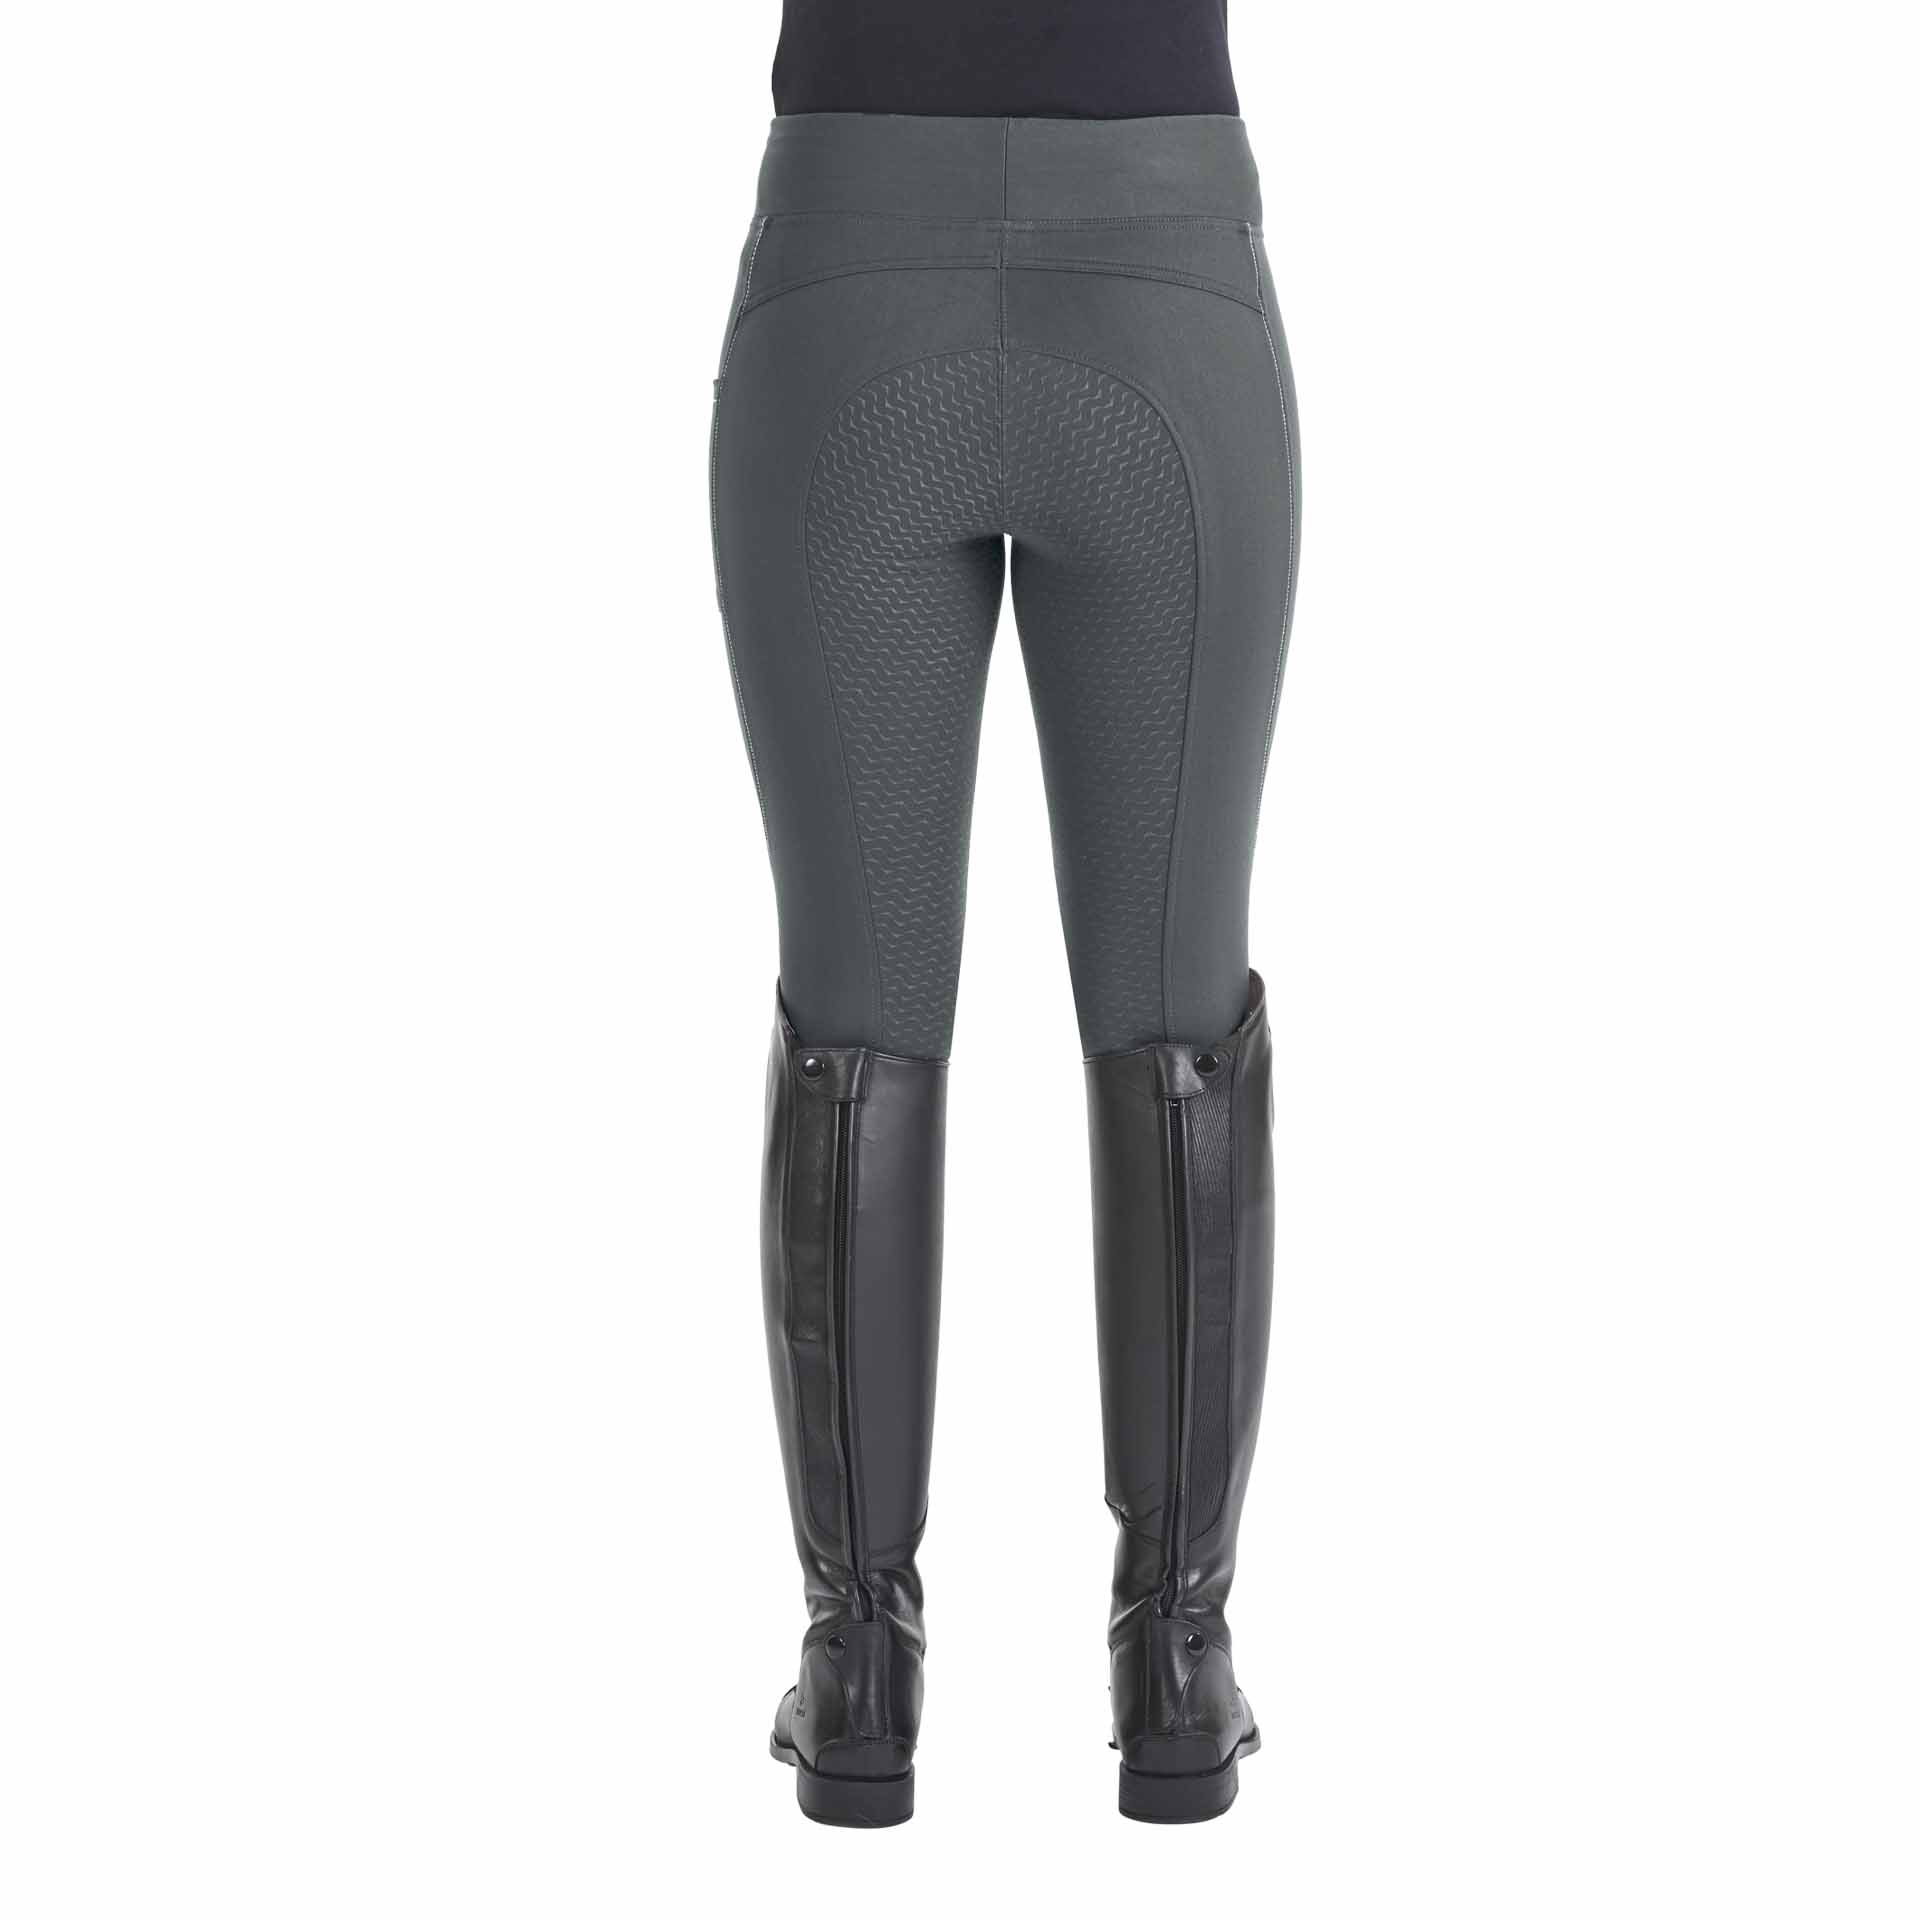 BUSSE Riding Tights TORNIO-WINTER 34 gray/gray